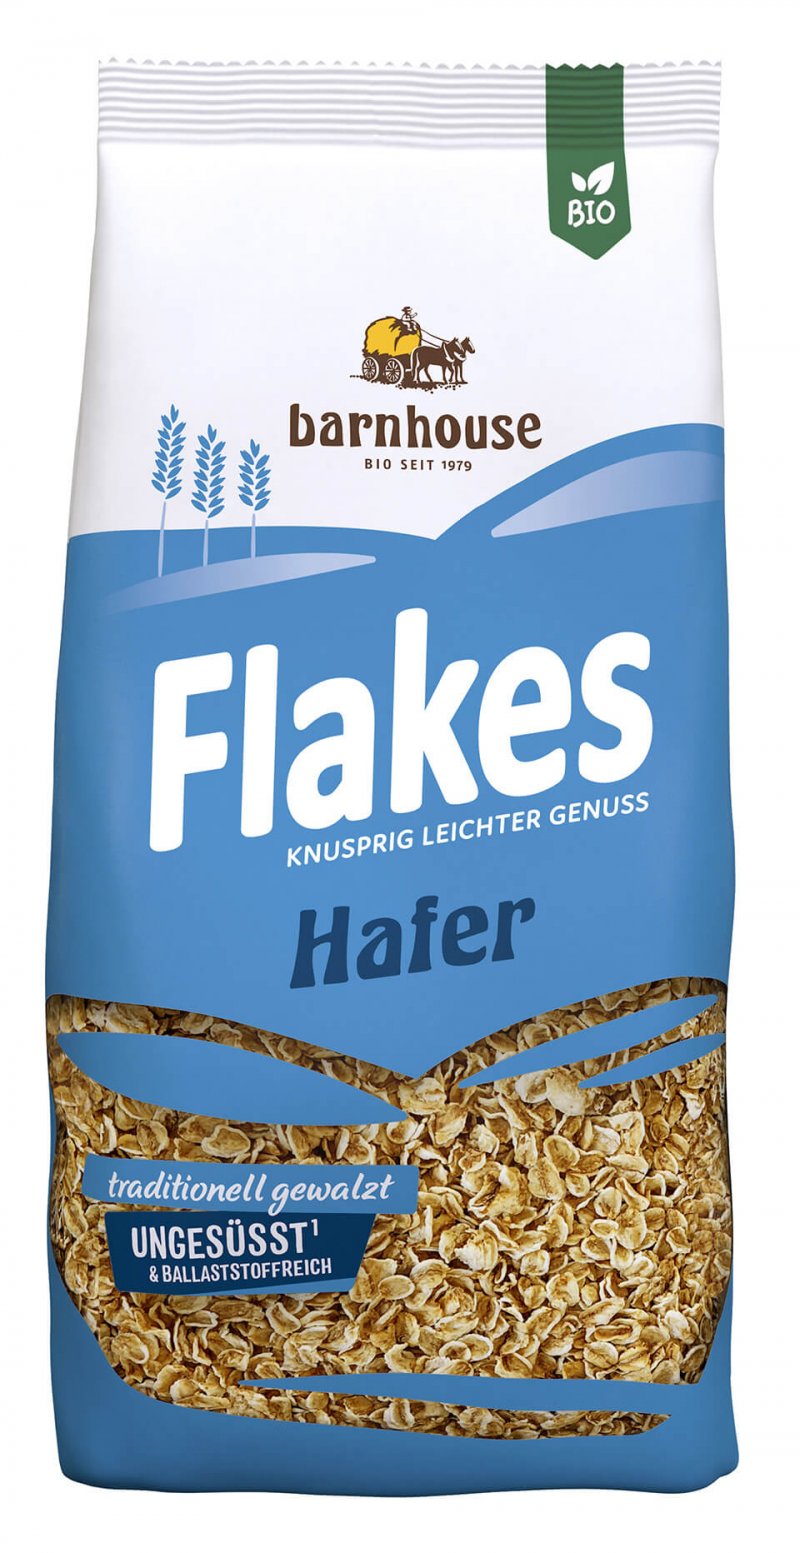 Flakes haver 